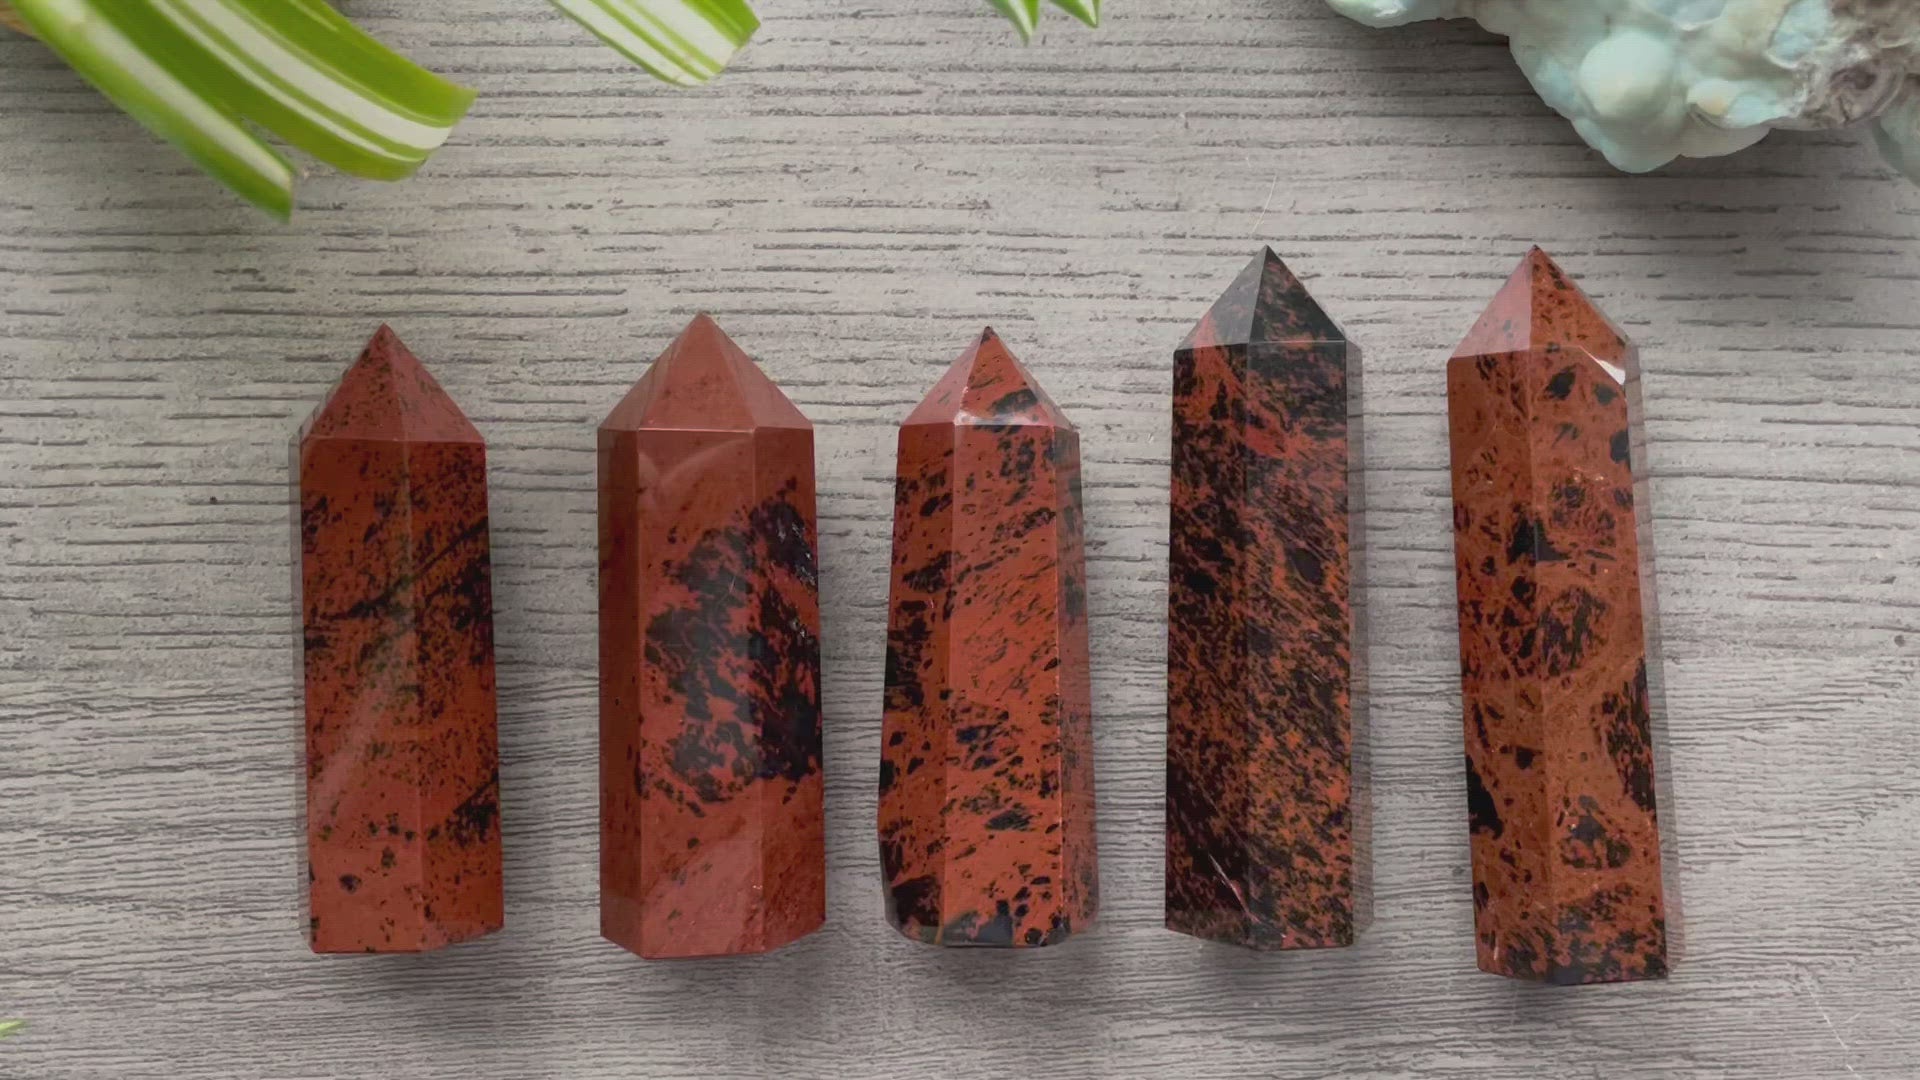 Pictured are various points of mahogany obsidian.